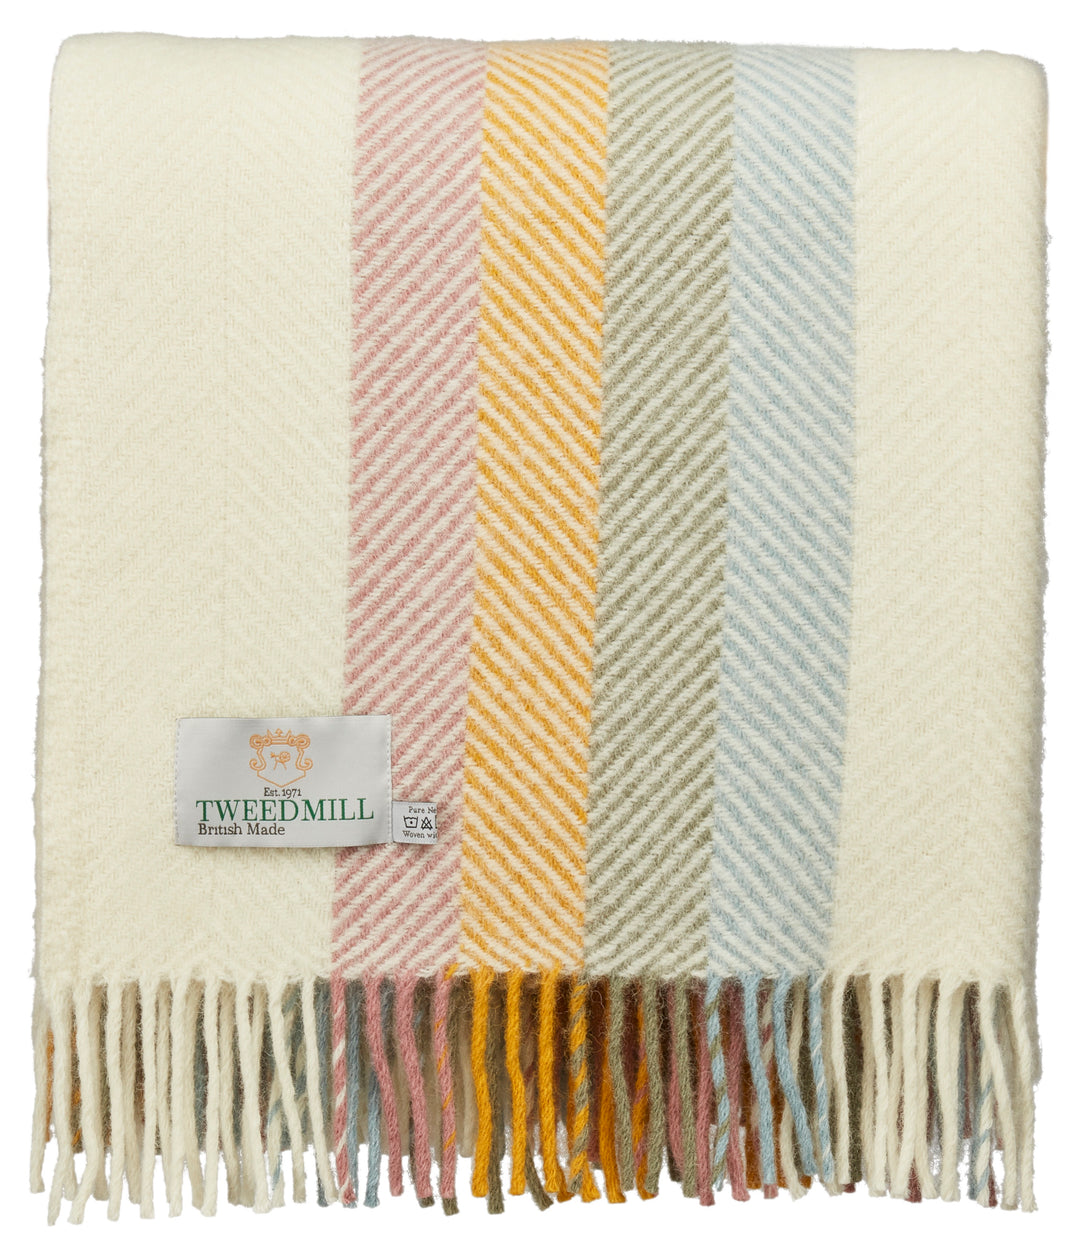 cream wool blanket with pink, yellow, green and blue stripes